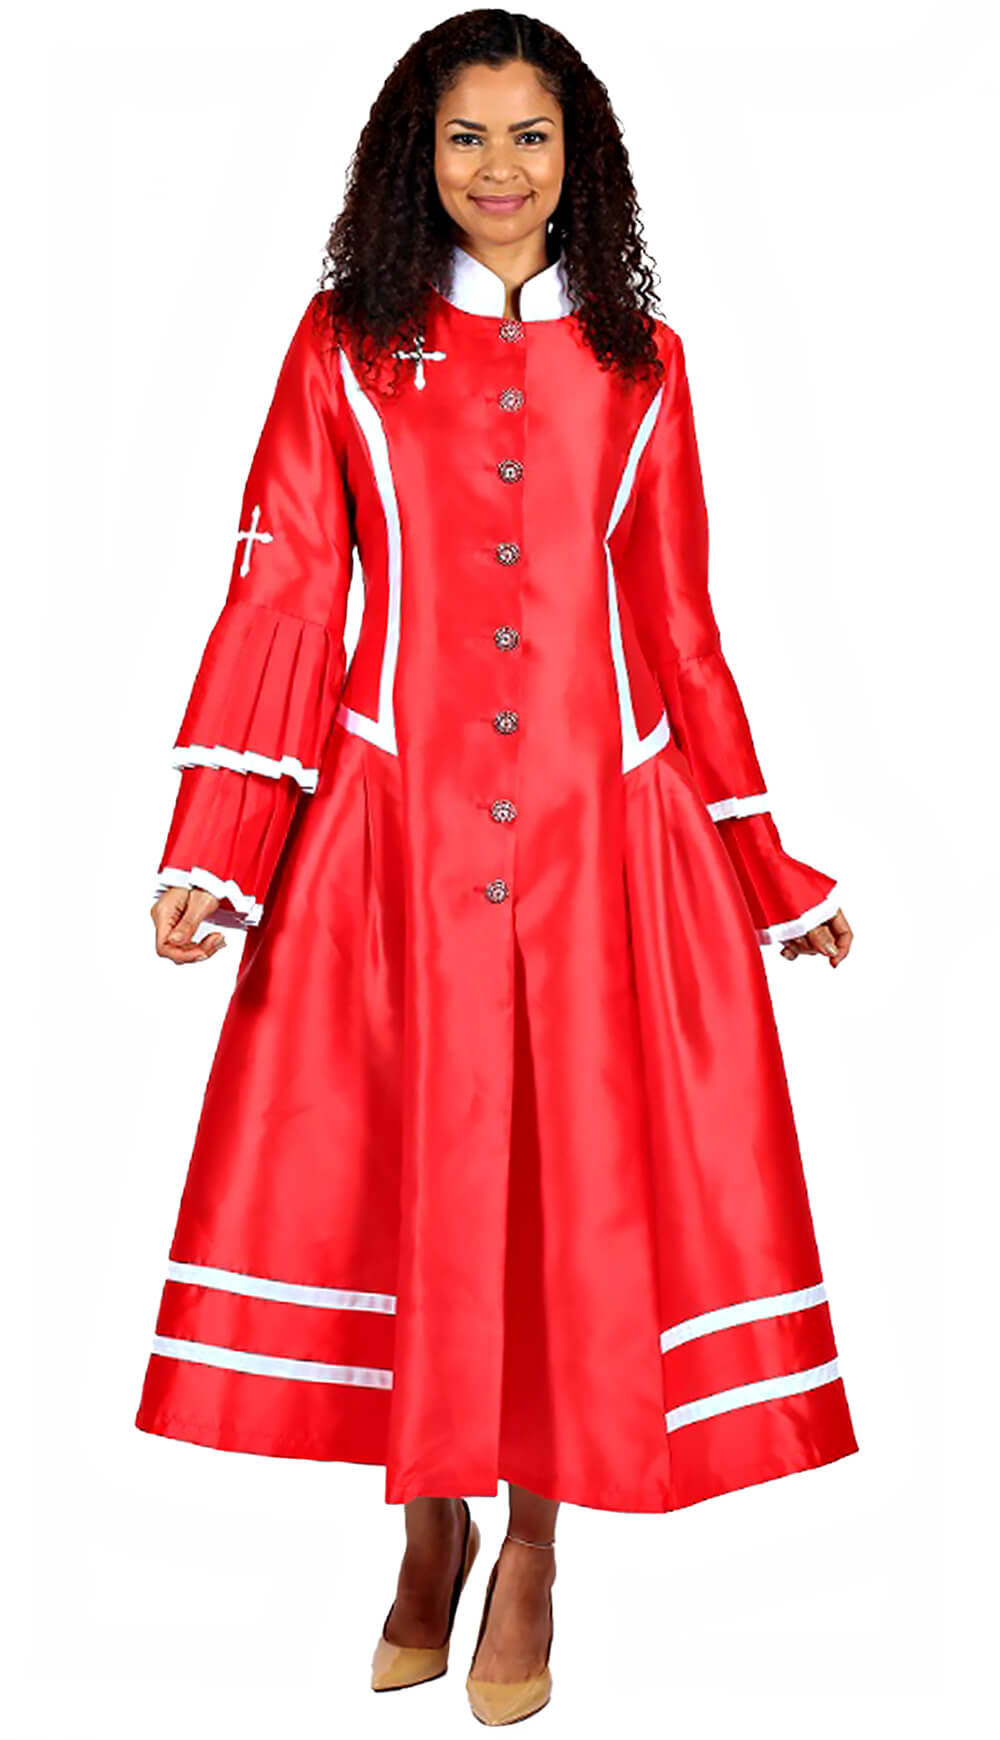 Diana Couture Church Robe 8708-Red/White - Church Suits For Less